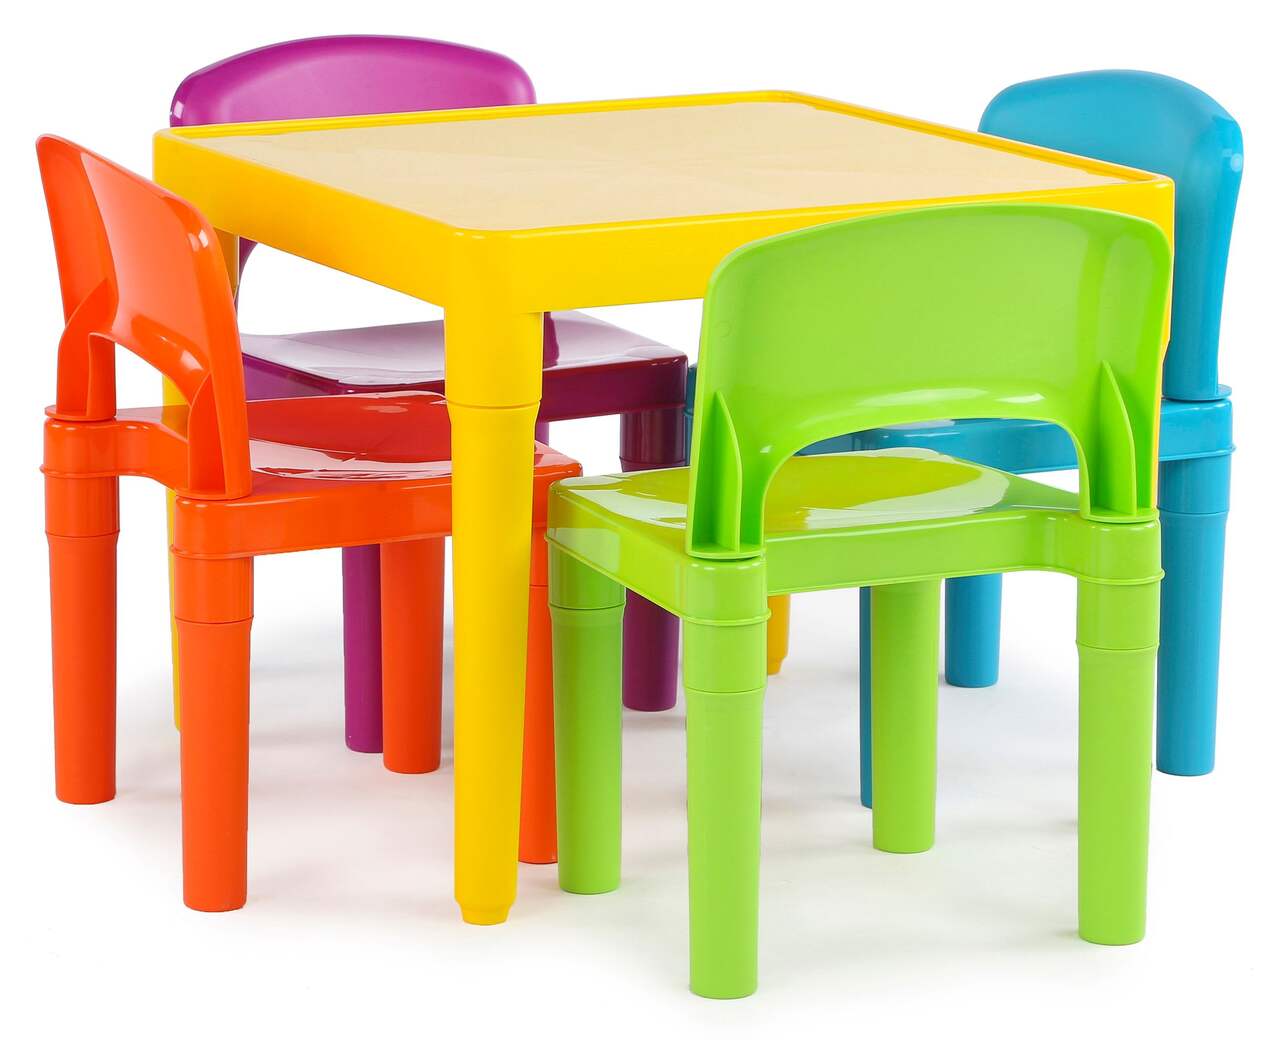 https://media-www.canadiantire.ca/product/living/home-decor/furniture/3749859/humble-crew-kids-plastic-table-4-chair-set-multicolour-60d2f82b-9ddf-40fe-b27f-4d05e0db98df-jpgrendition.jpg?imdensity=1&imwidth=640&impolicy=mZoom